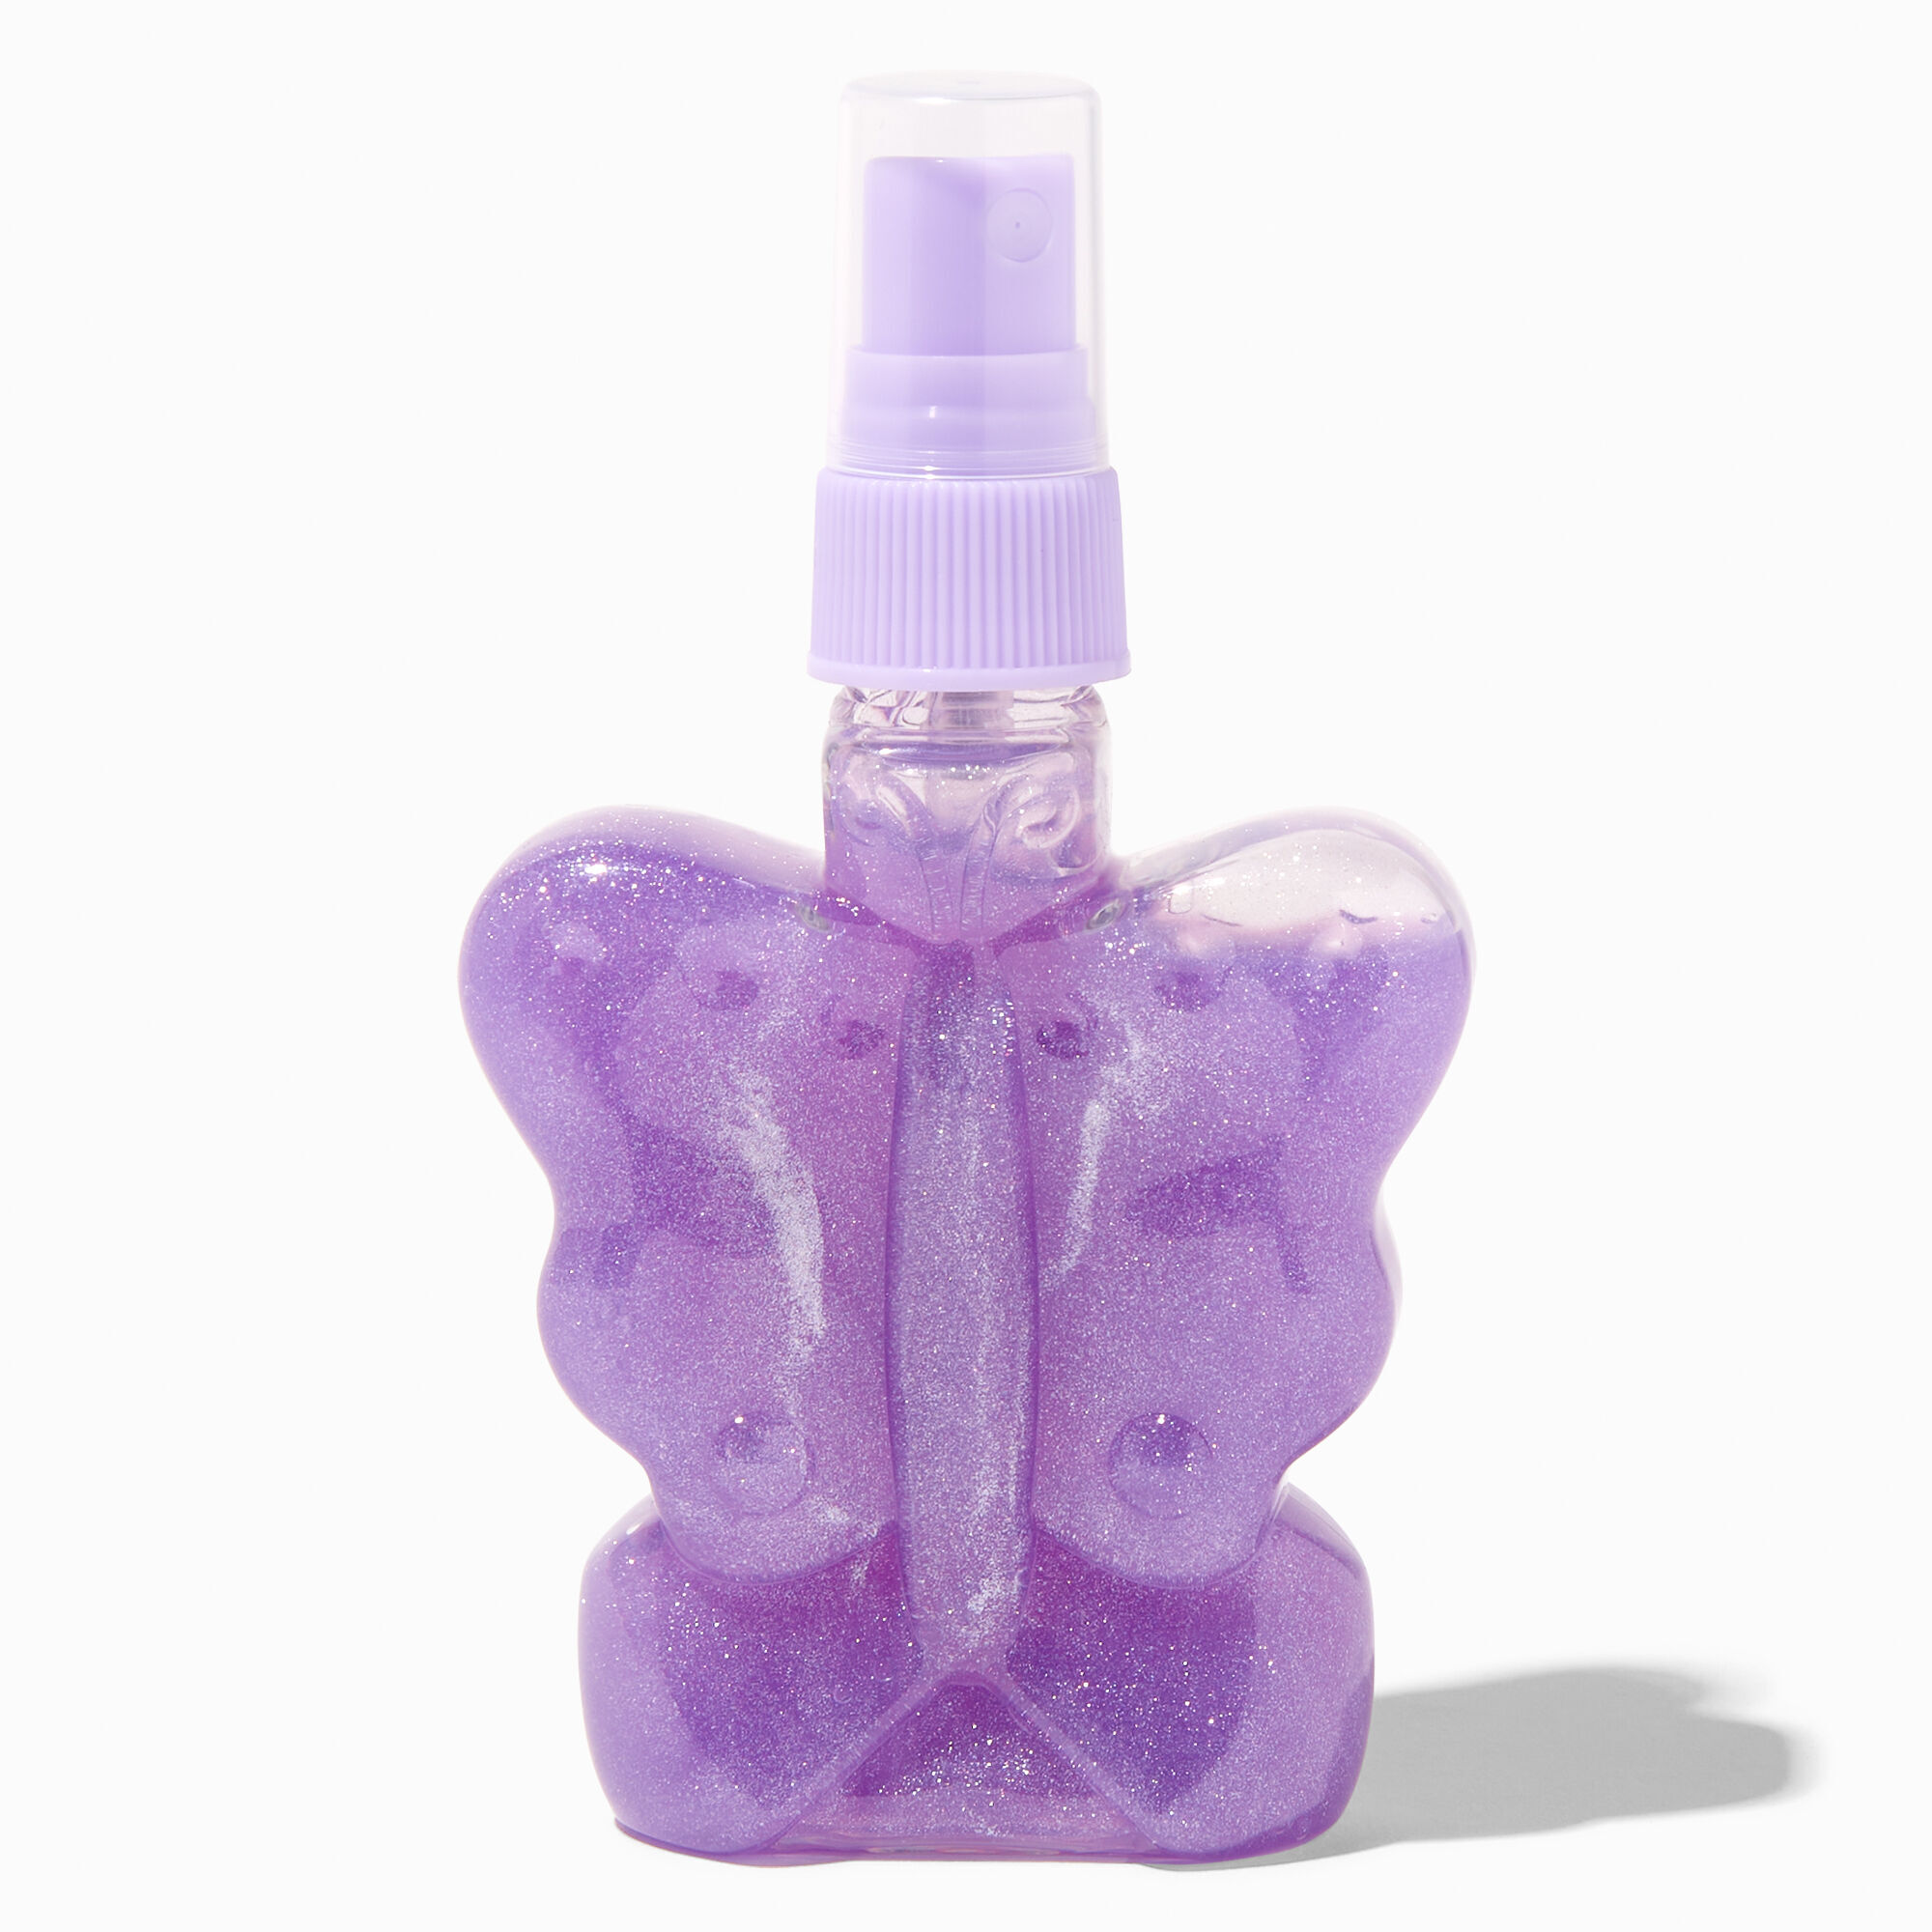 View Claires Club Glitter Butterfly Body Mist Purple information